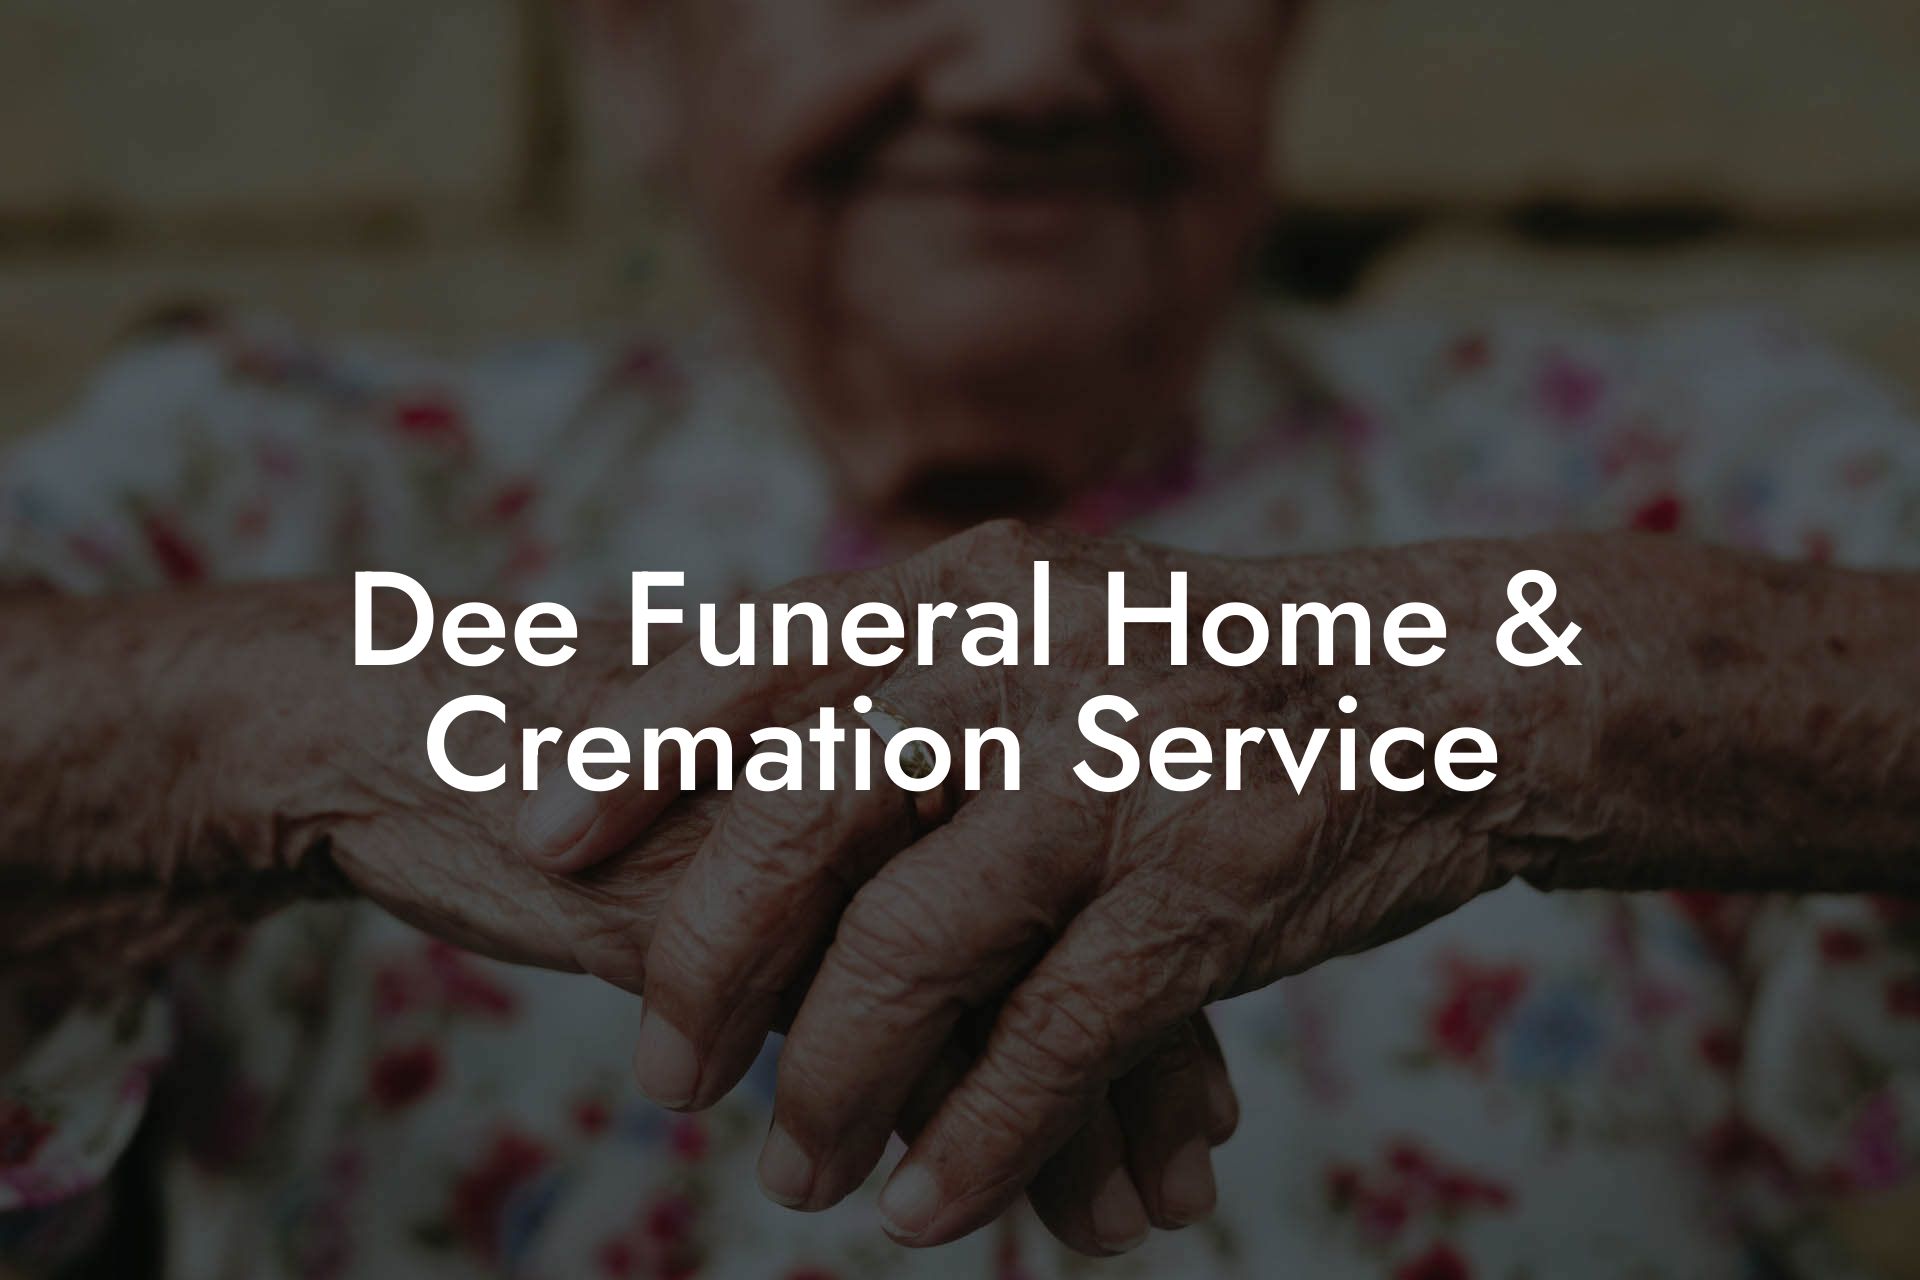 Dee Funeral Home & Cremation Service